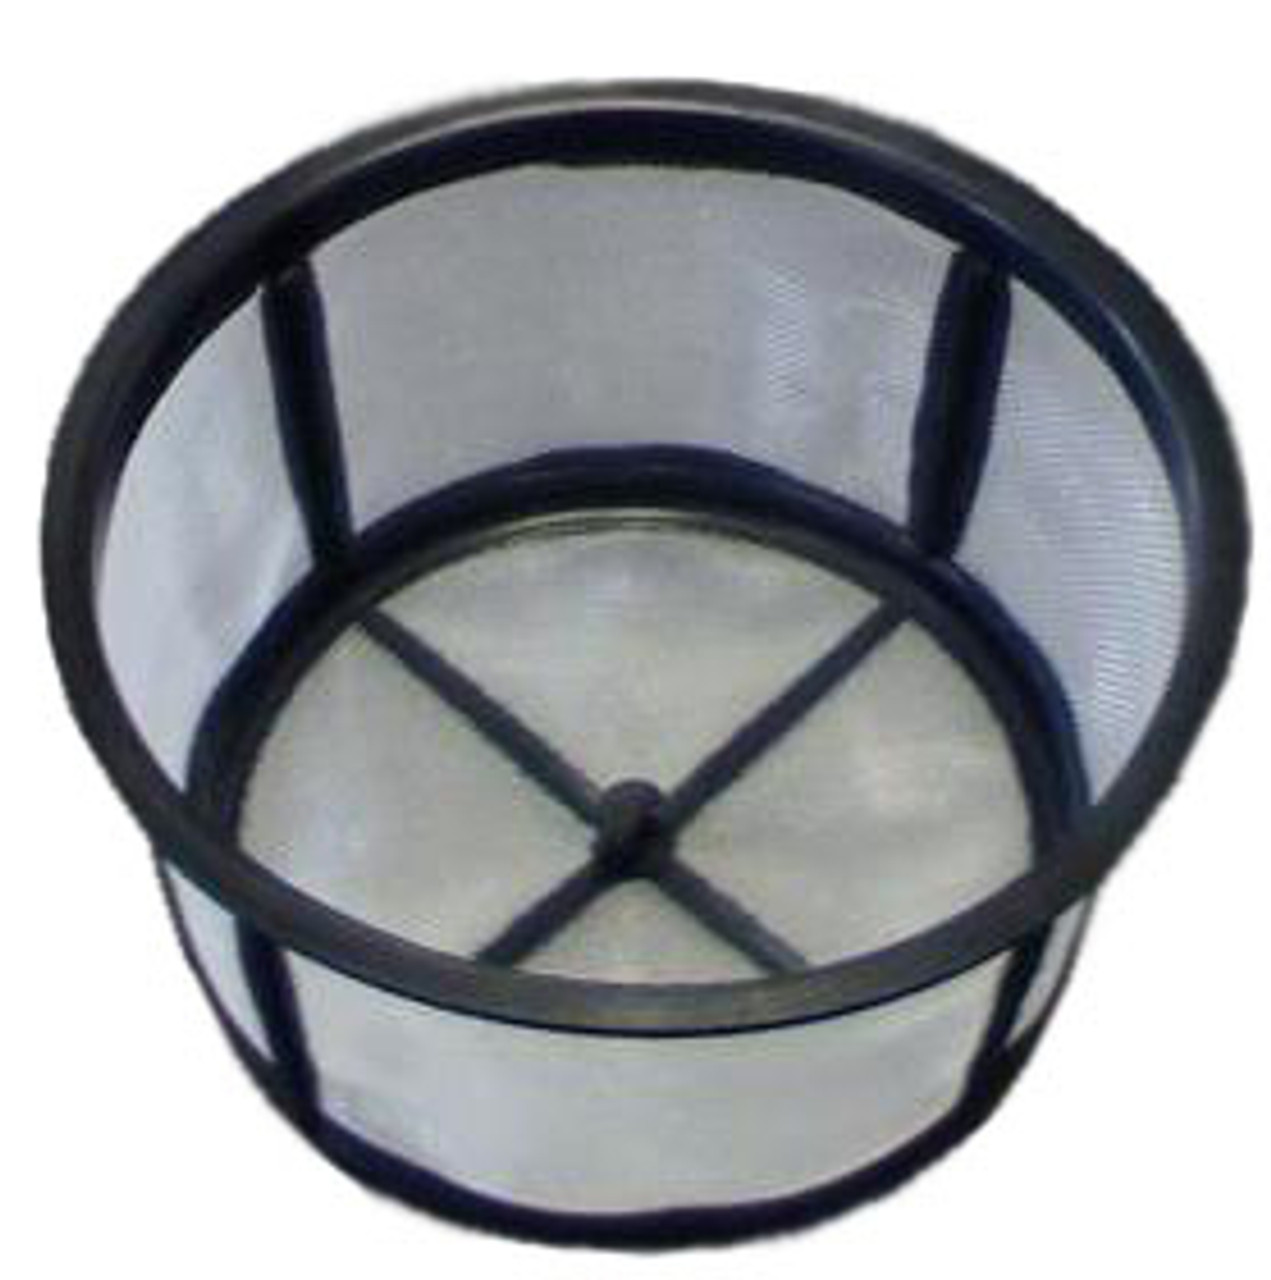 Support Baskets, Strainers & Accessory Baskets - Filtration Systems